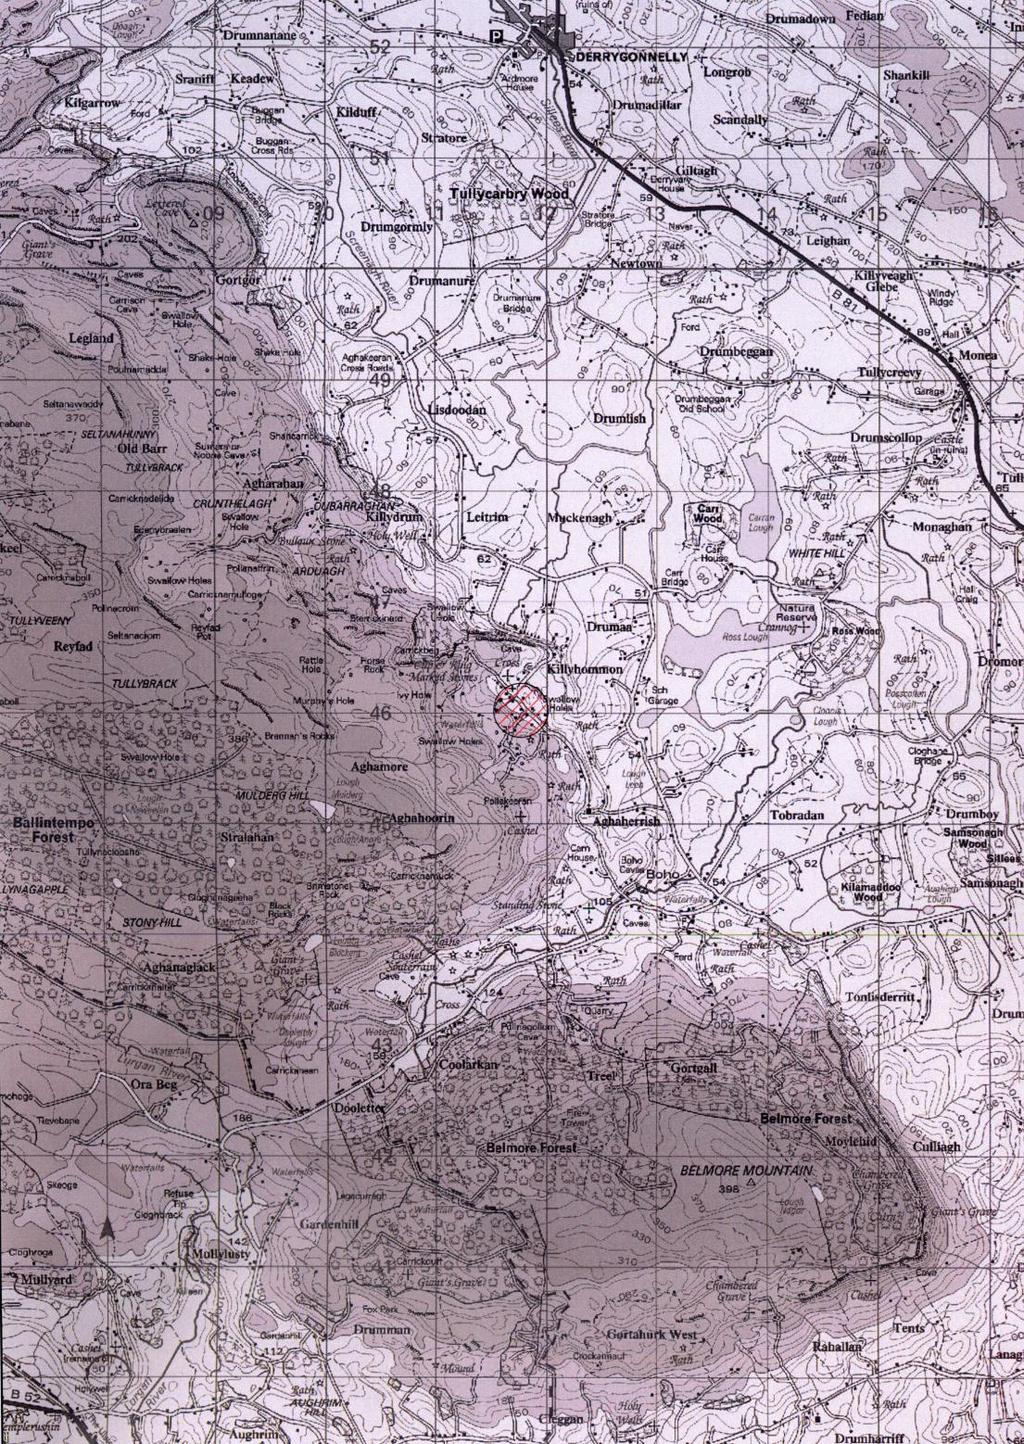 Figure One: General map showing